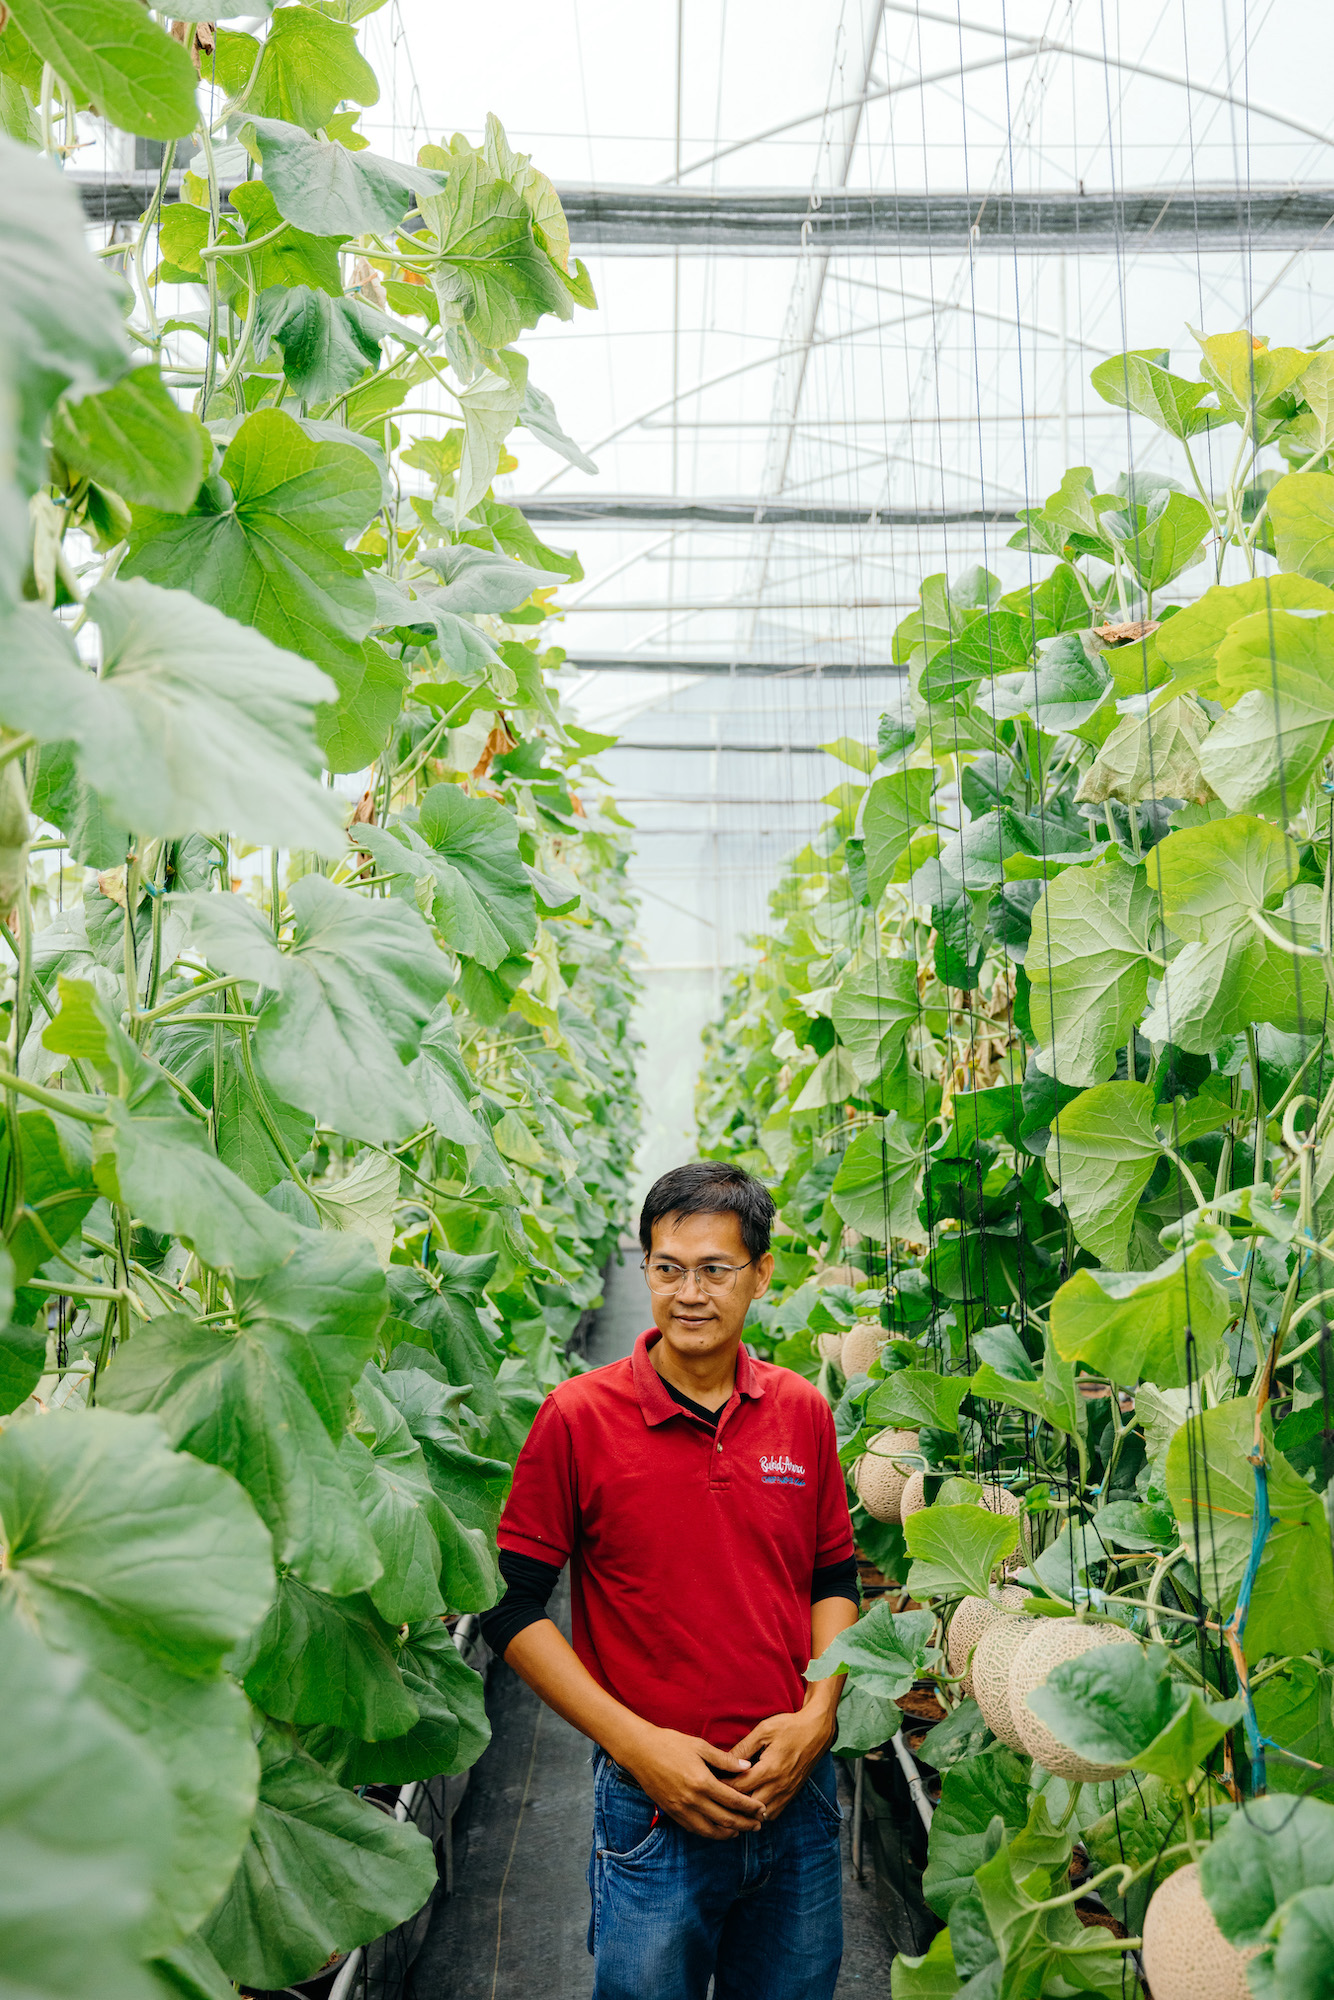 As an agriculturist, Michael Caballes’ expertise includes greenhouse production, high-value crop production, farm systems, and farm operations management